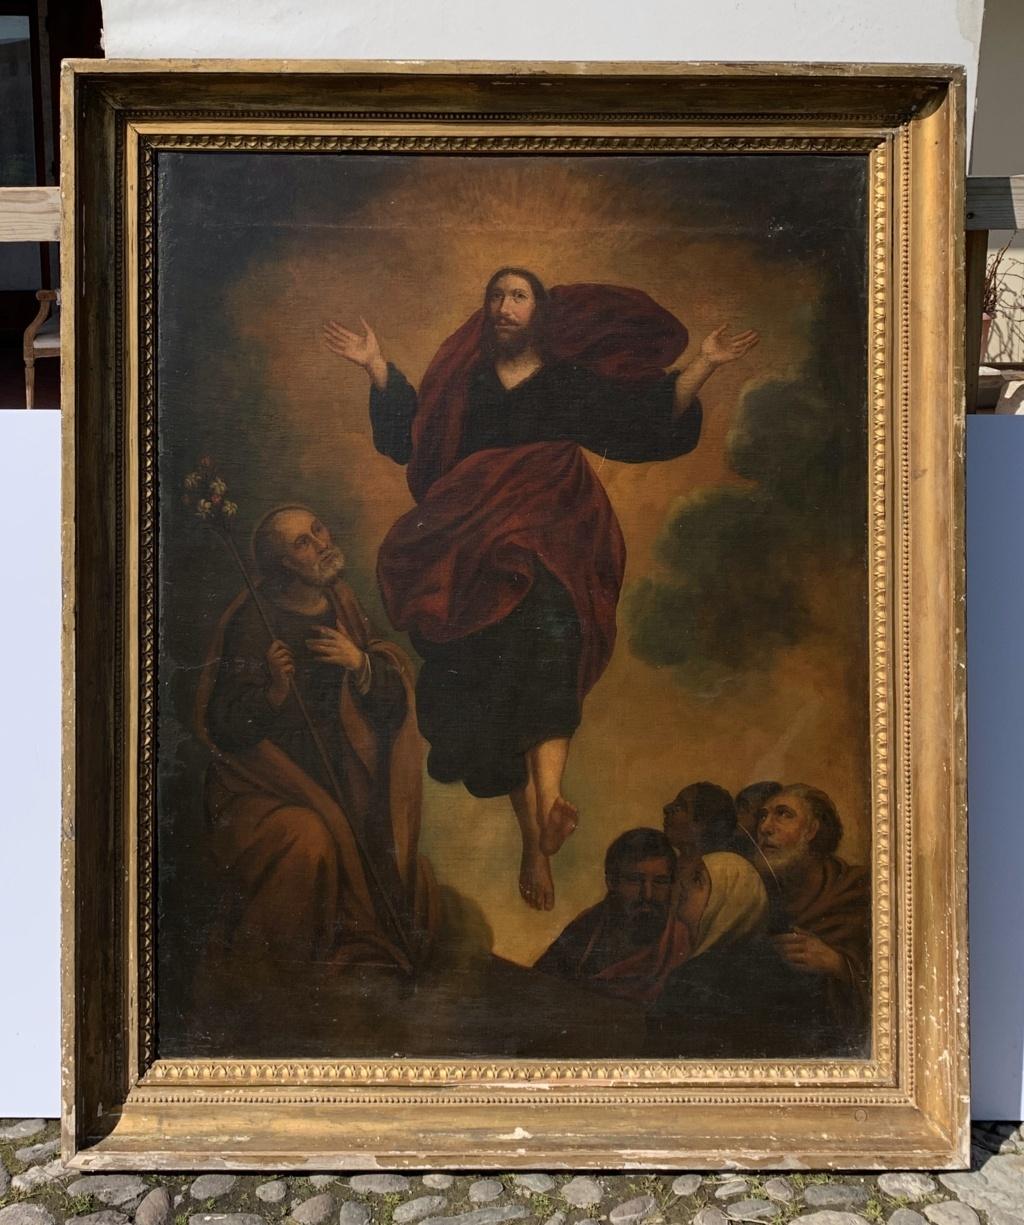 Baroque Italian master - 17th century figure painting - Resurrection Christ  - Painting by Unknown